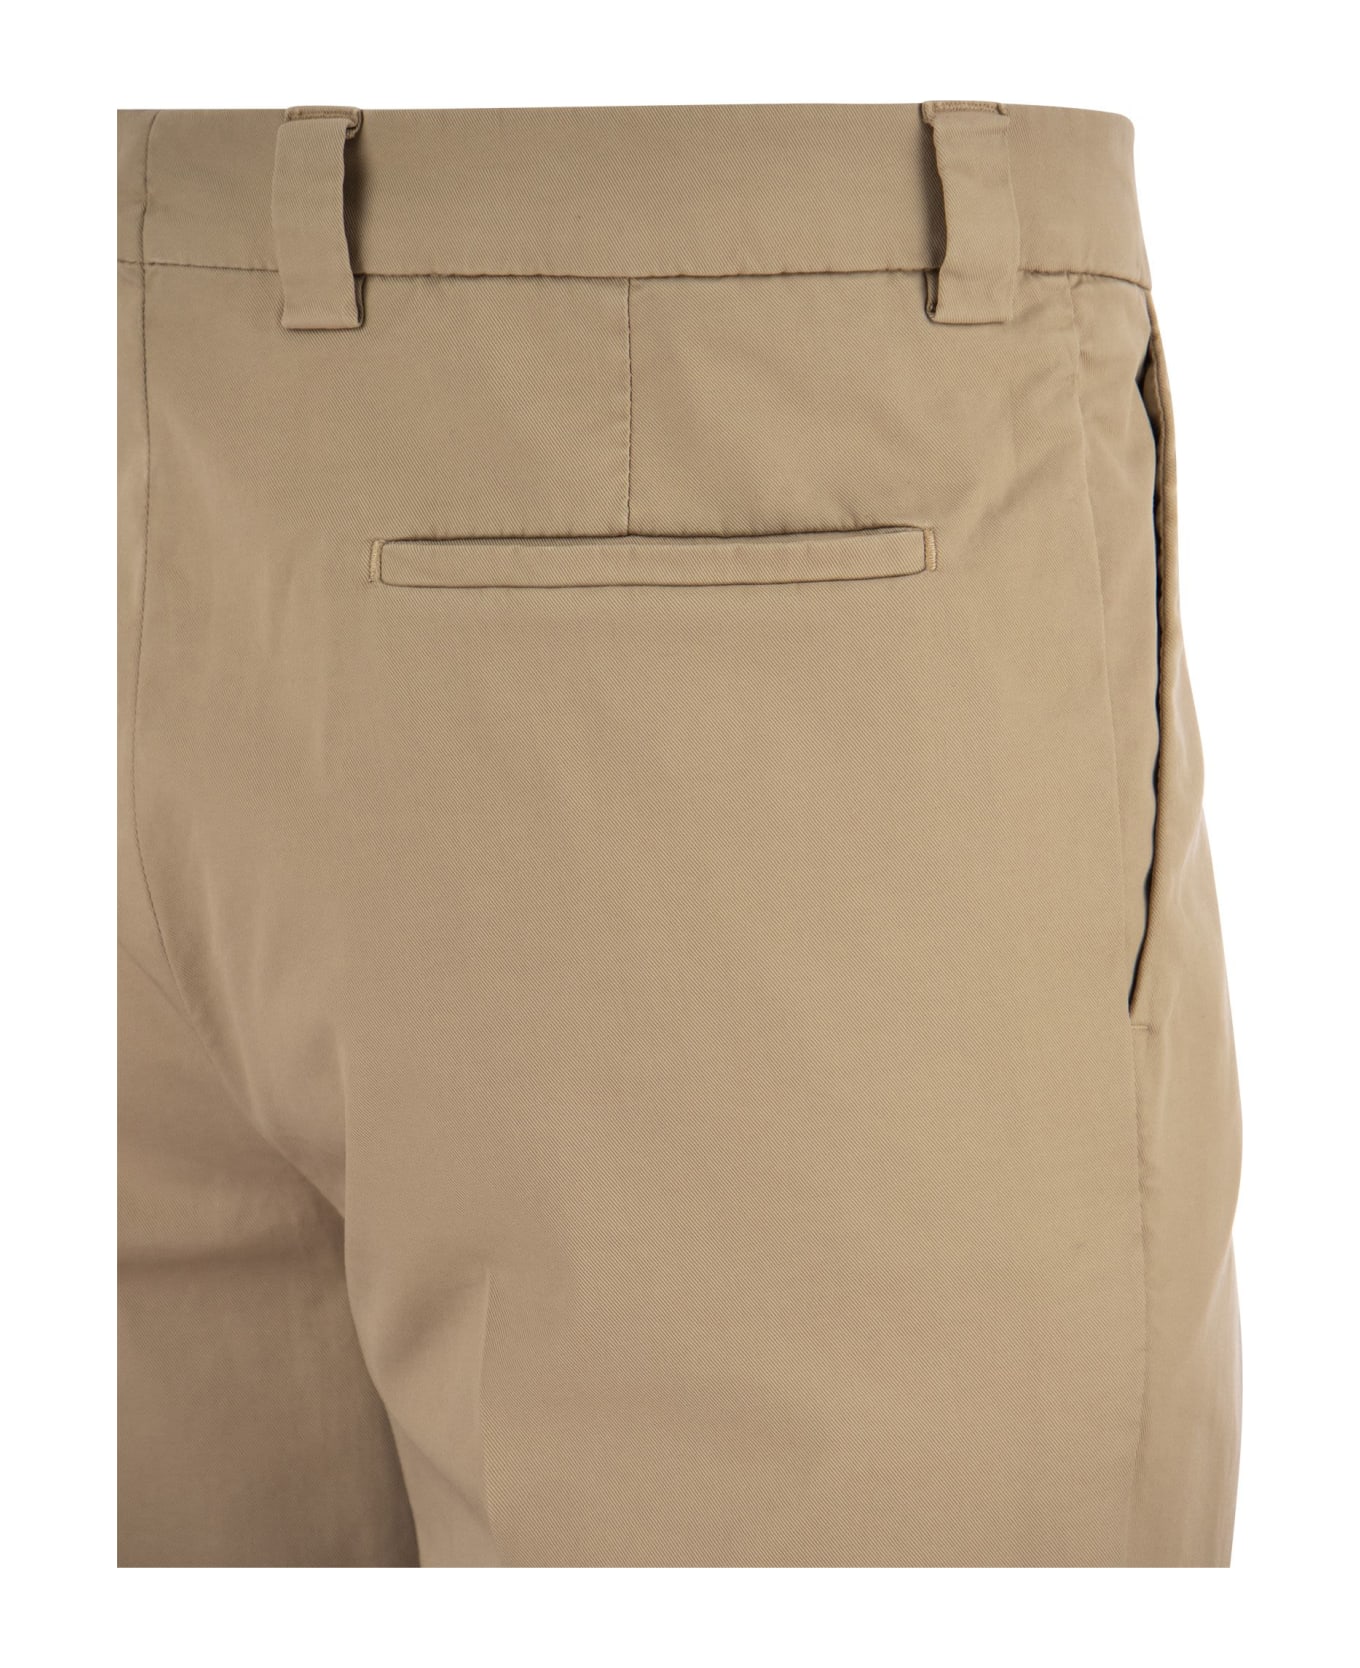 Brunello Cucinelli Garment-dyed Leisure Fit Trousers In American Pima Comfort Cotton With Pleats - Sand